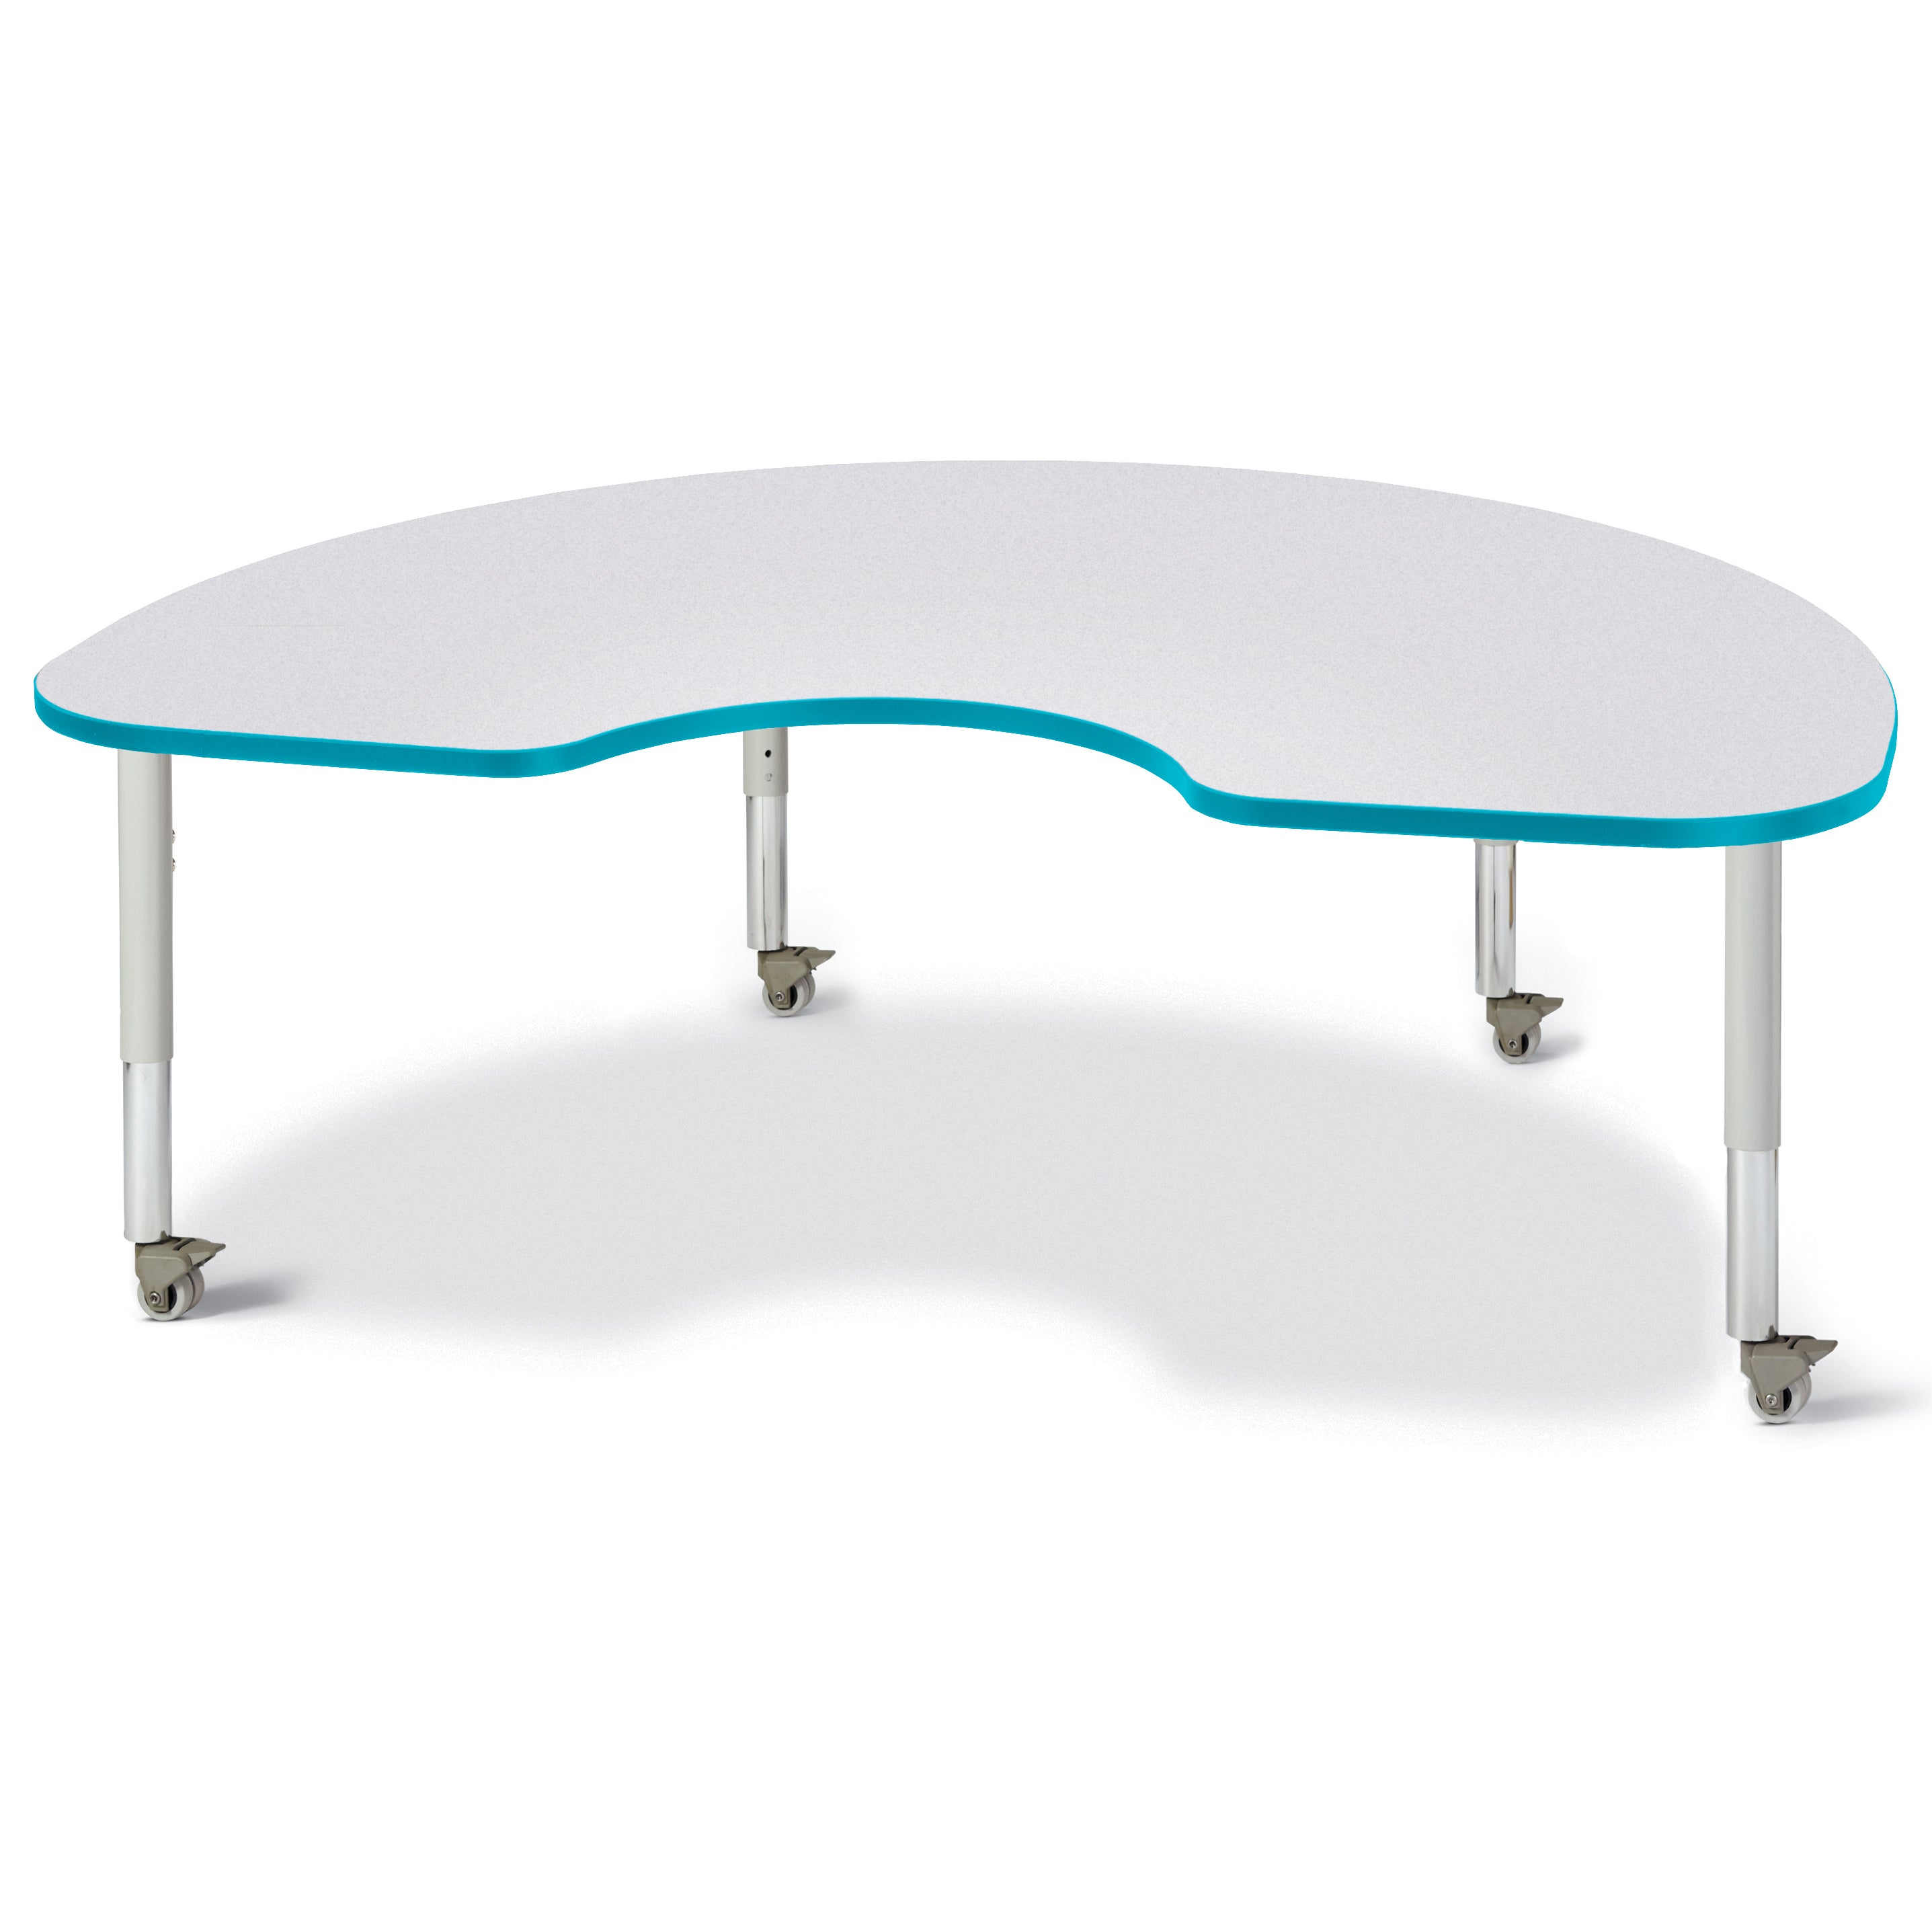 6423JCM005, Berries Kidney Activity Table - 48" X 72", Mobile - Freckled Gray/Teal/Gray